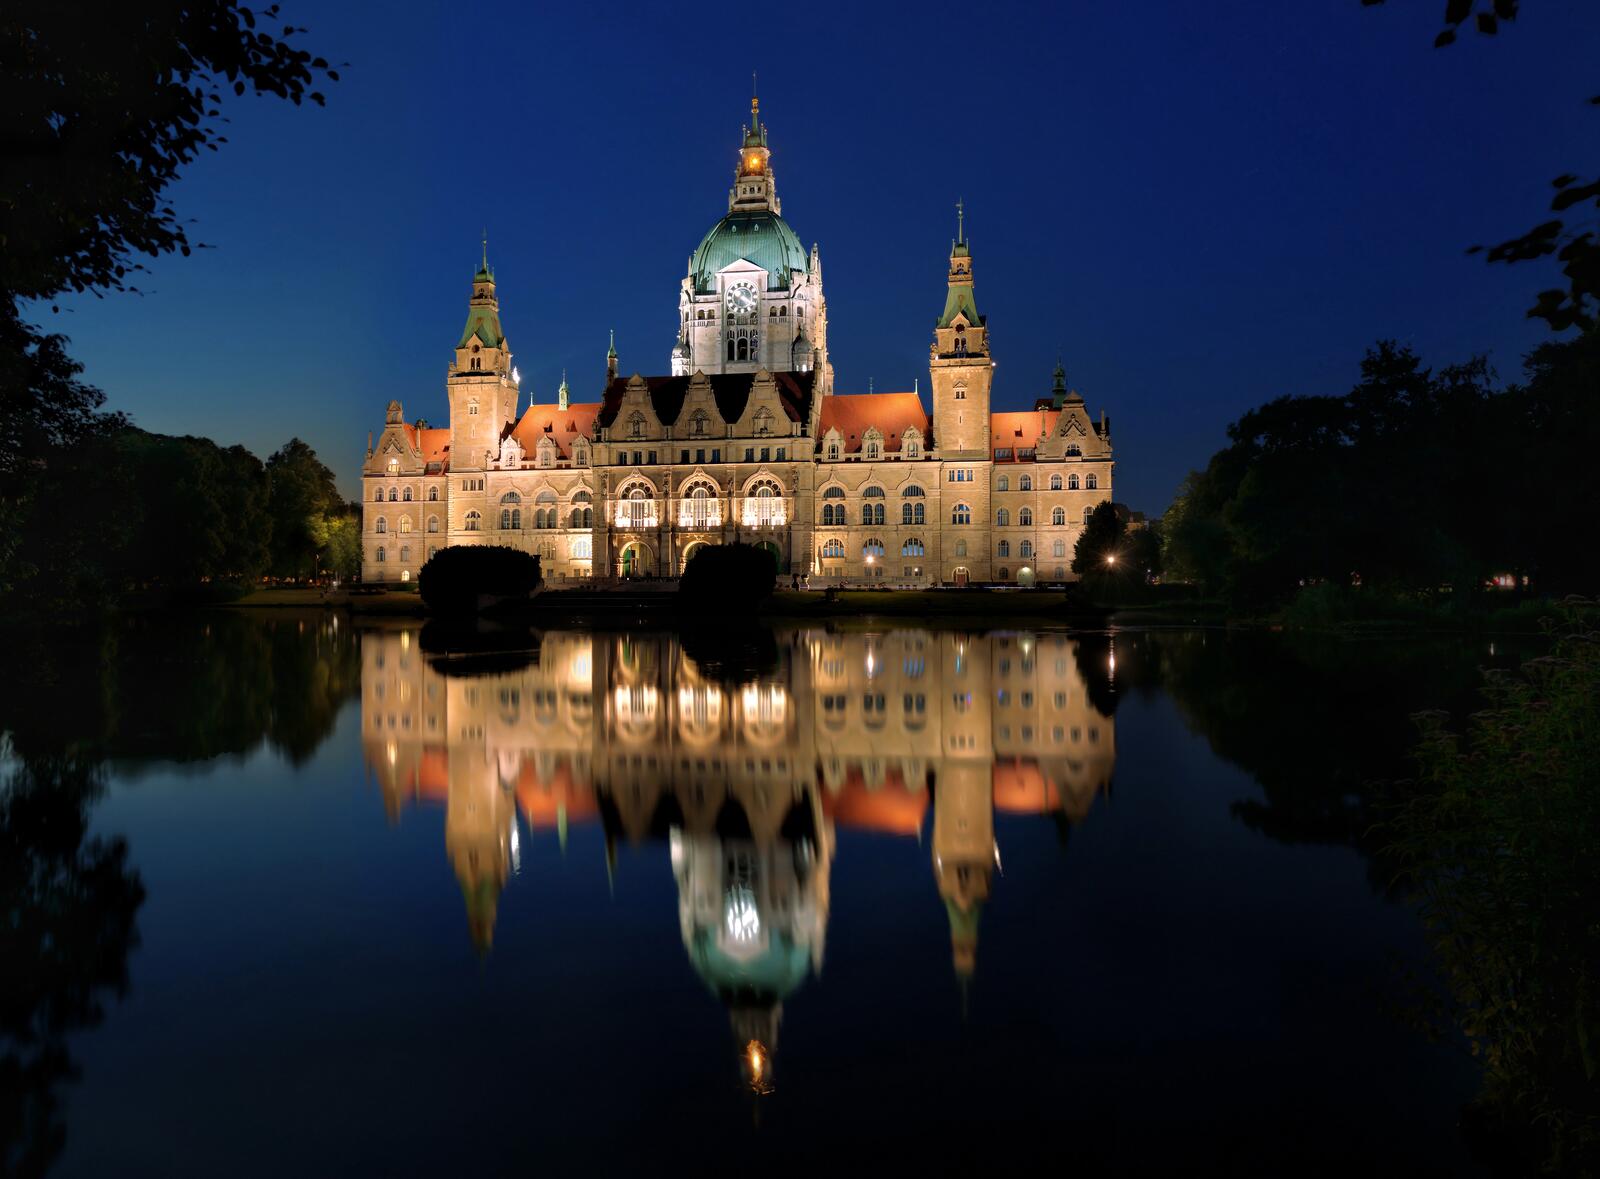 Free photo A large castle in Germany illuminated in the evening